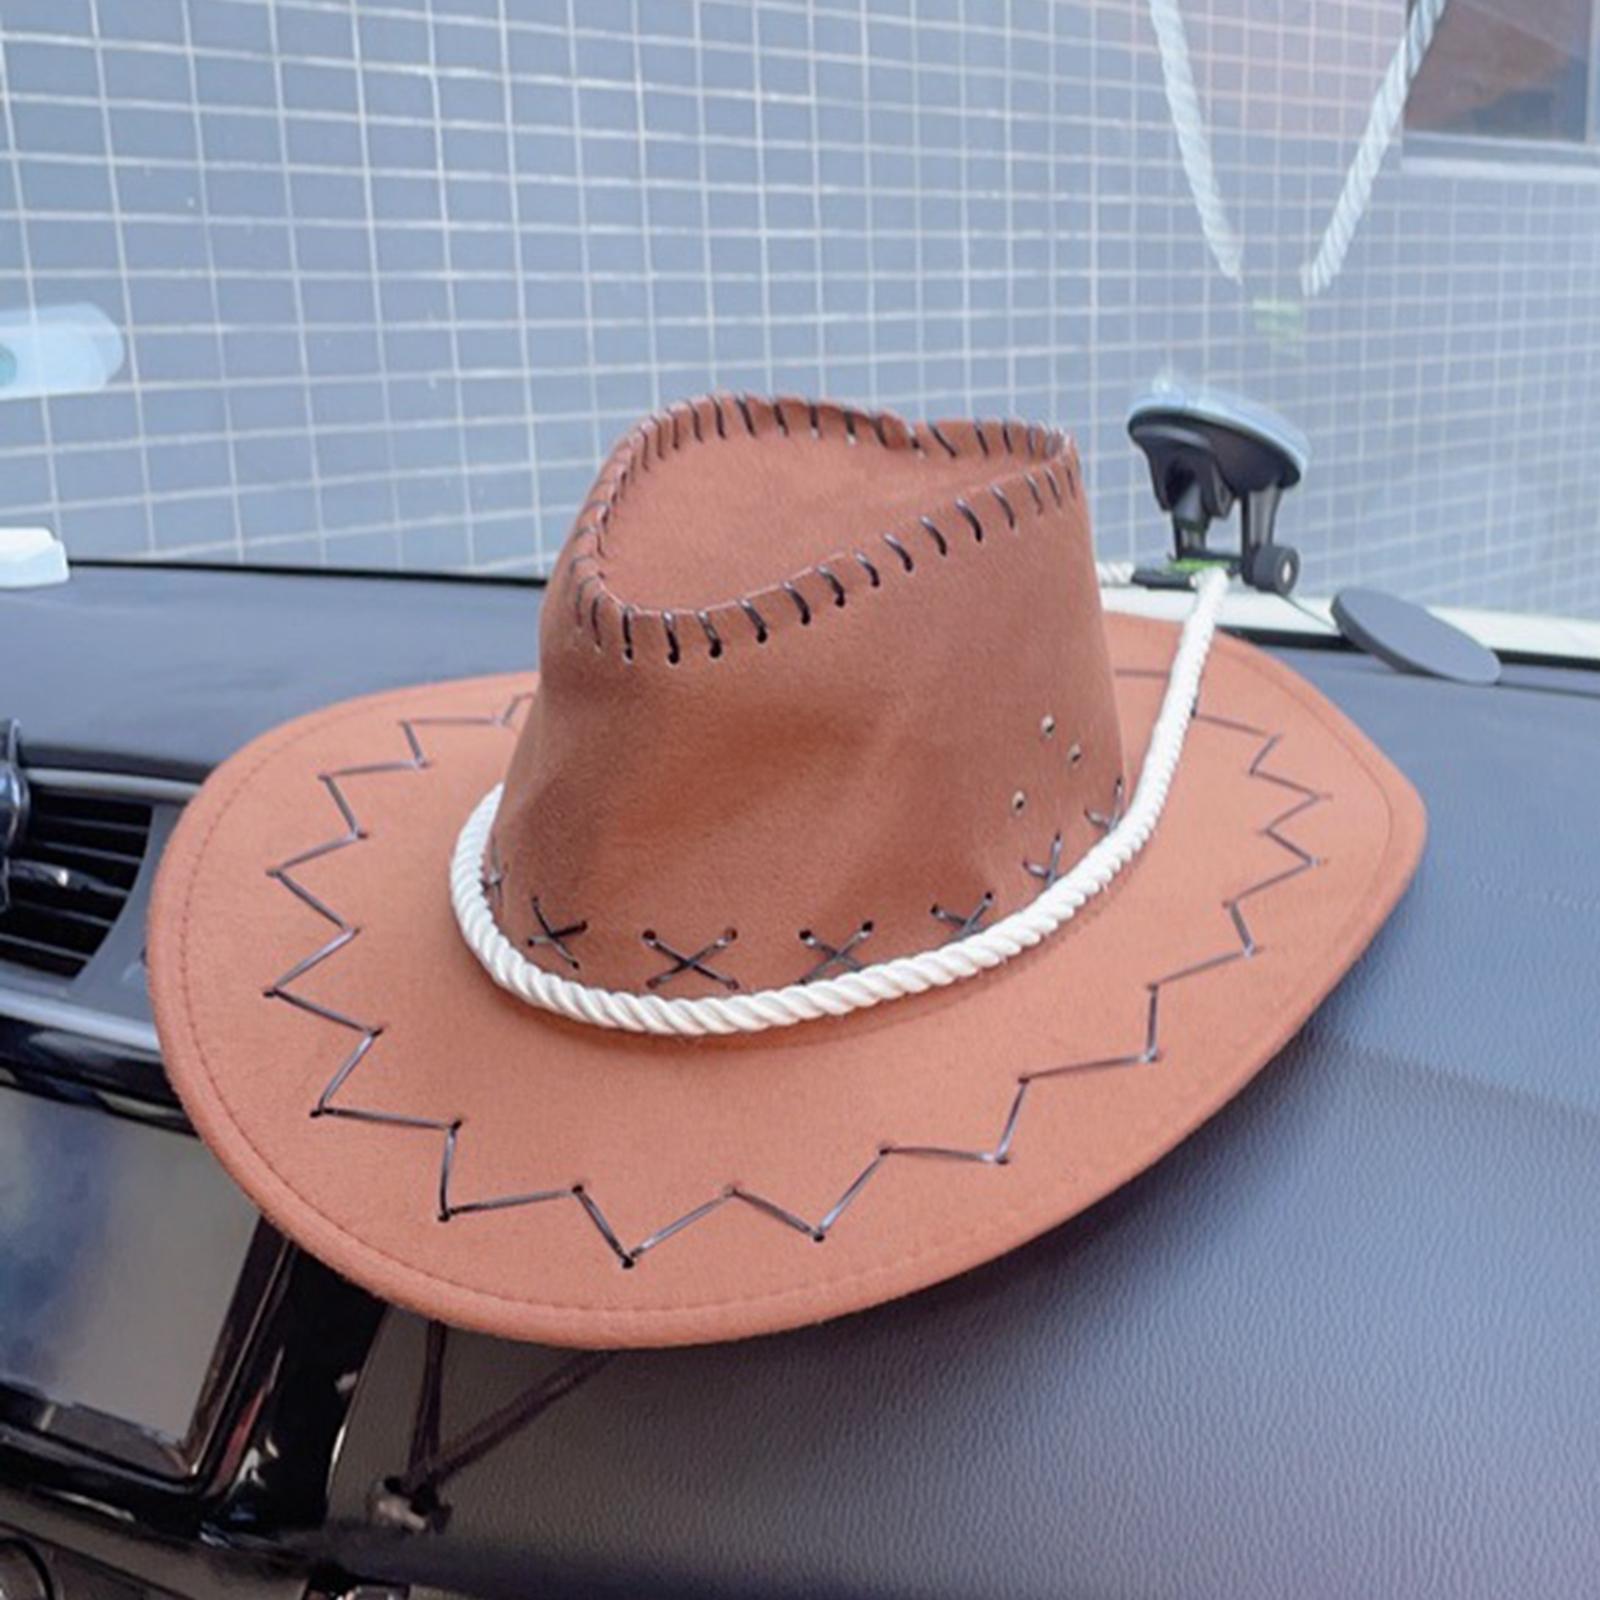 Cowboy Hat Holder Rack Universal Car Mounted Hat Holder for Car Truck Auto